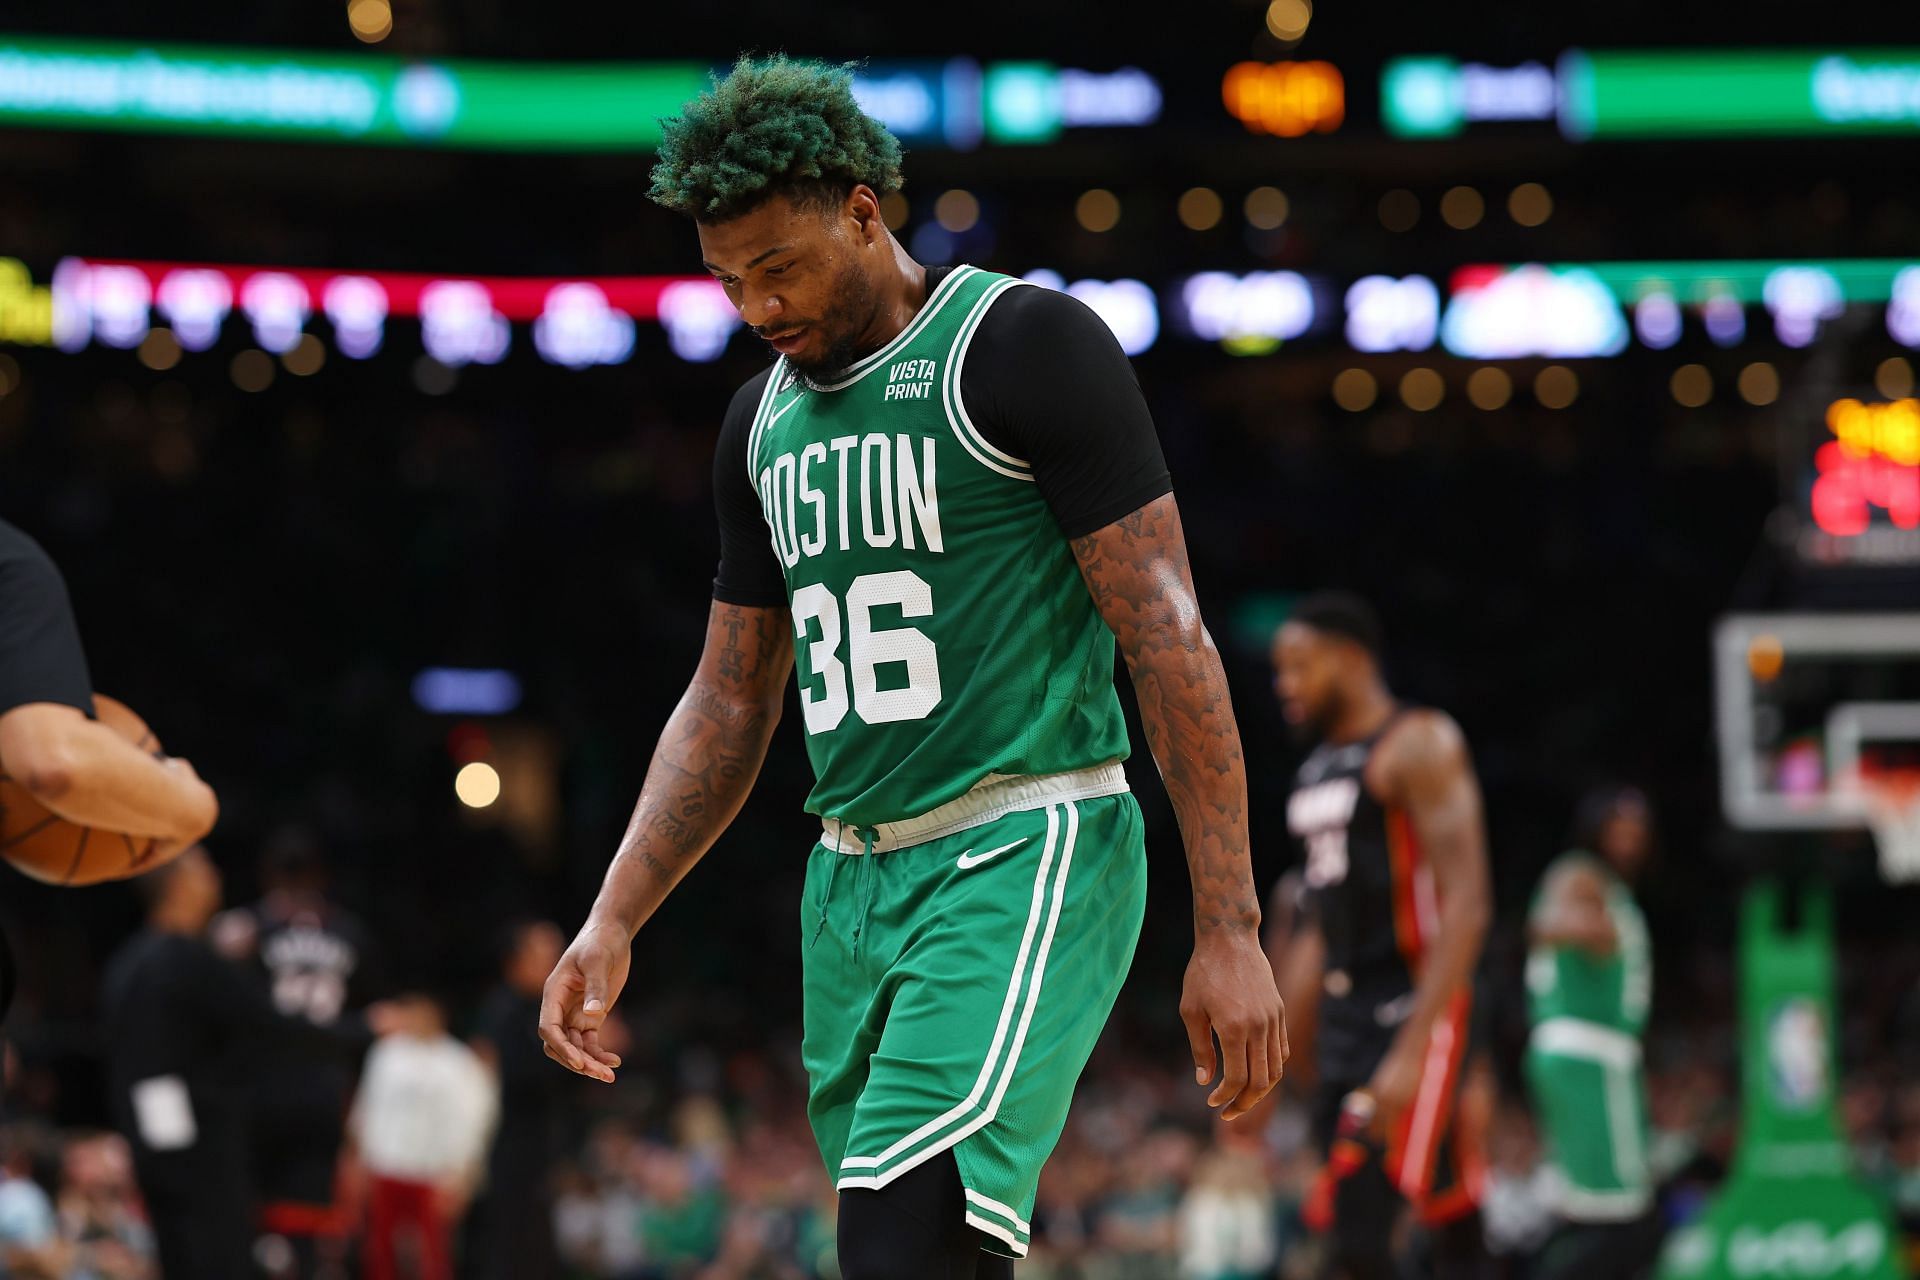 Marcus Smart Breaks Silence On Celtics Trade With Heartfelt Statement - The  Spun: What's Trending In The Sports World Today